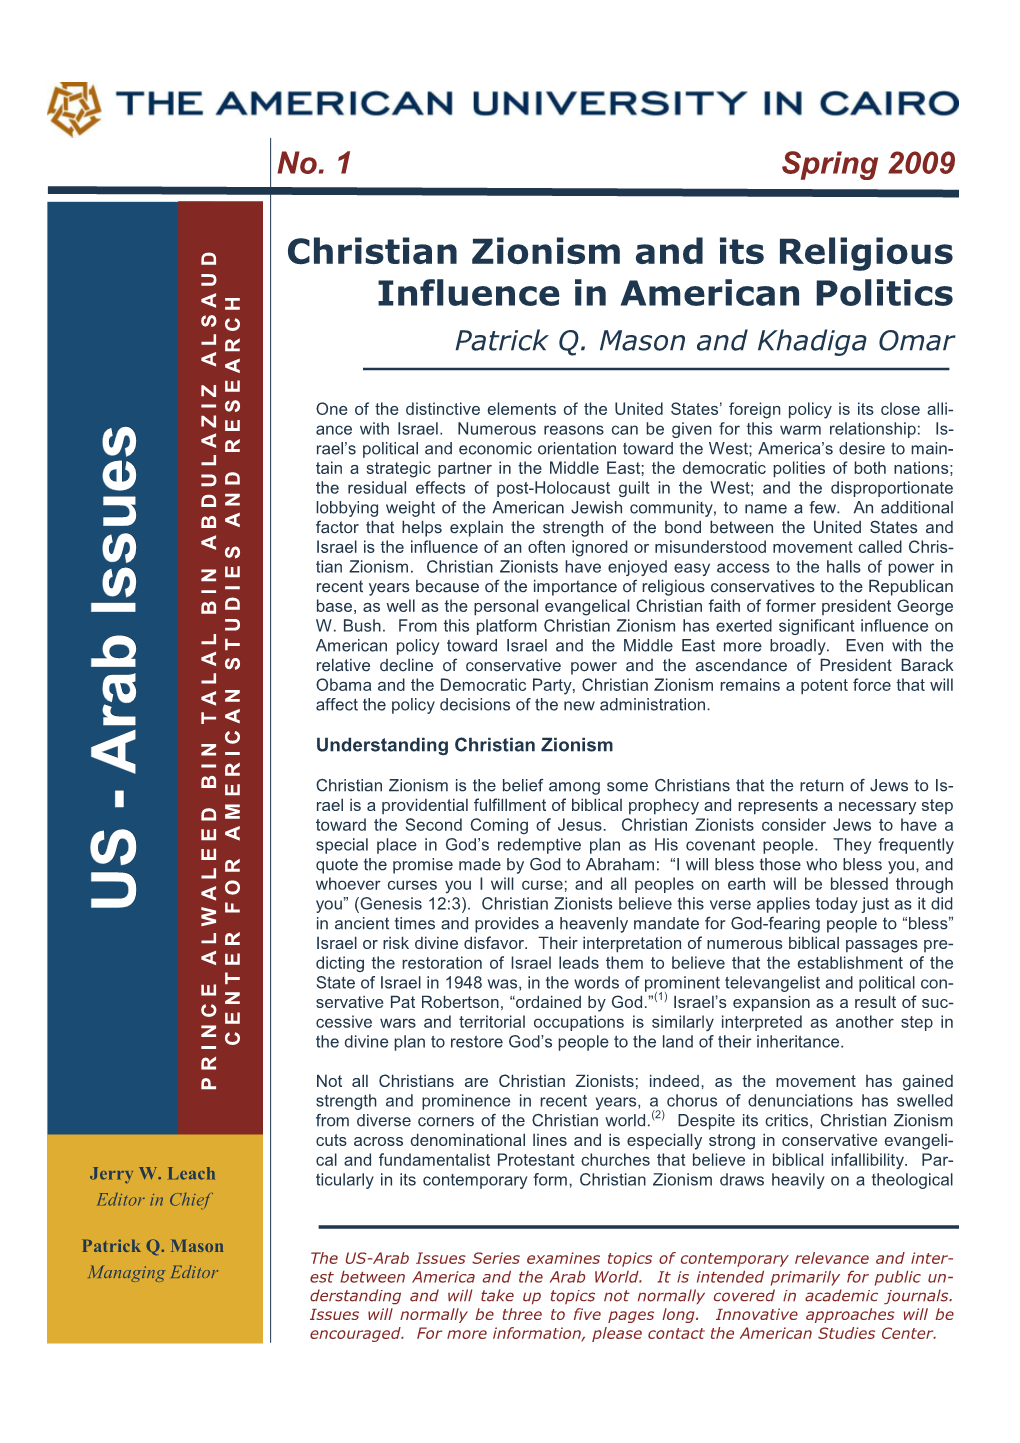 Christian Zionism and Its Religious Influence in American Politics Patrick Q